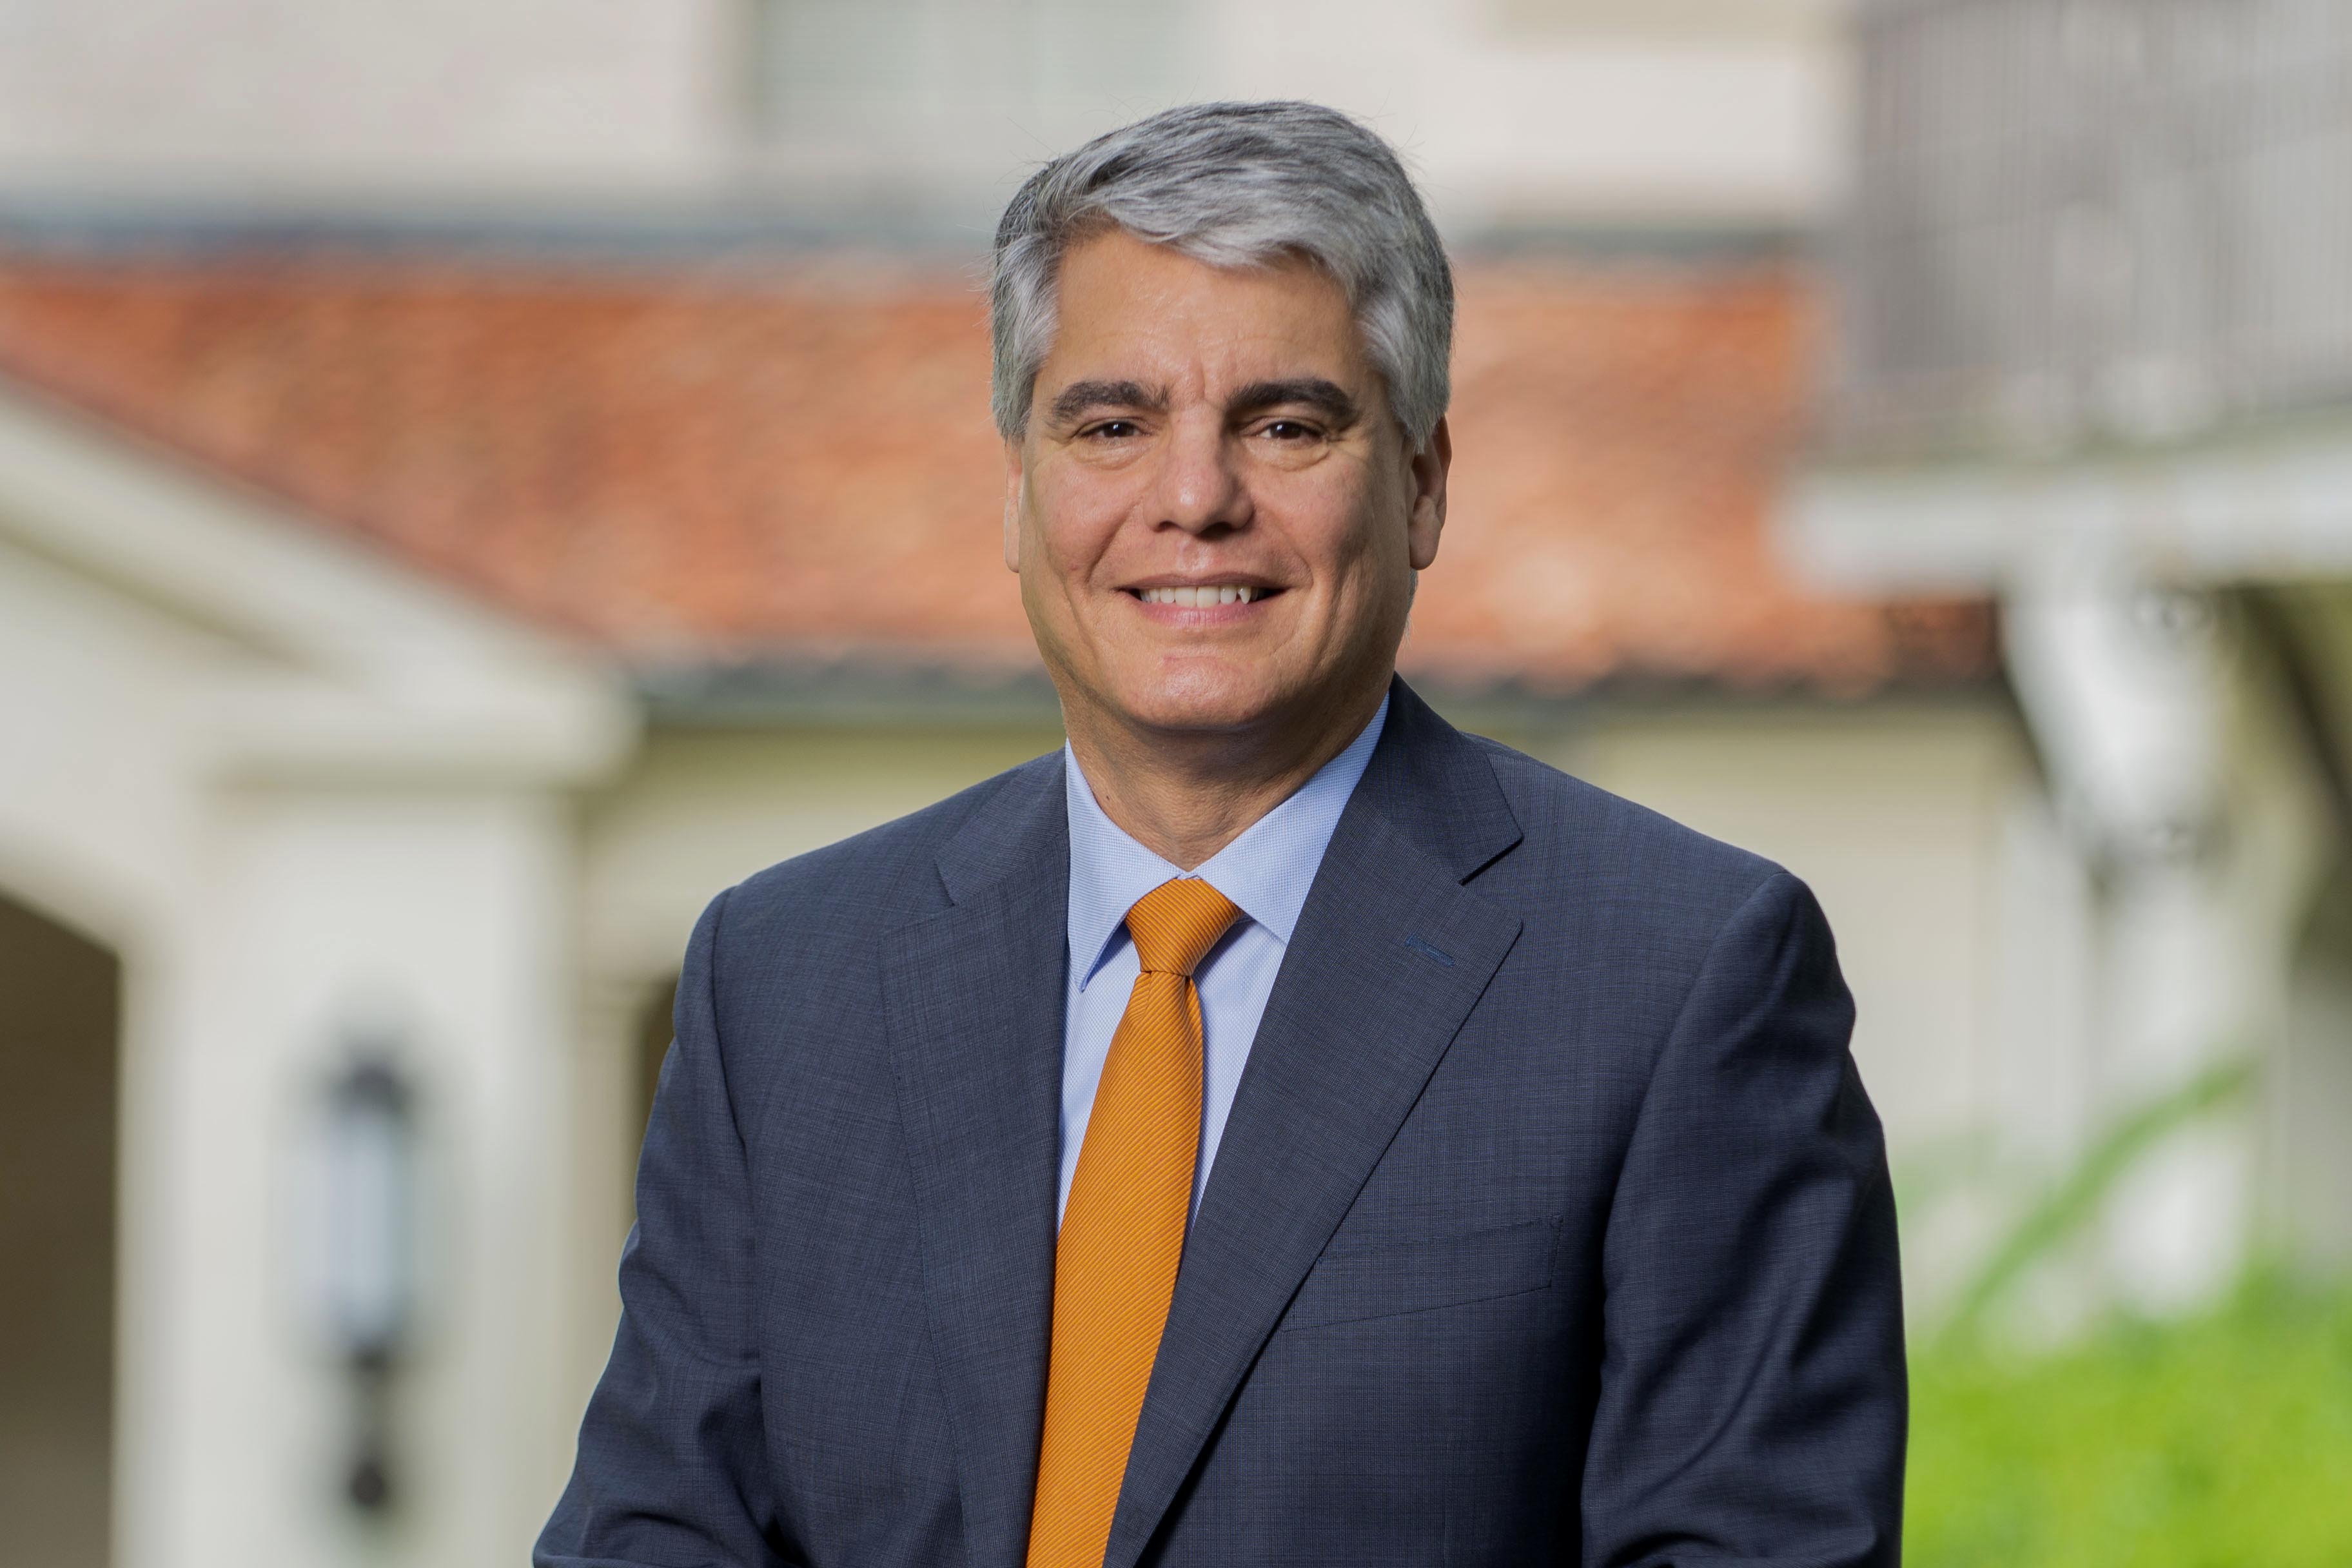 Gregory L. Fenves has been elected as the 21st president of Emory University by a unanimous vote of the board. niors were selected to receive the Bobby Jones scholarship.